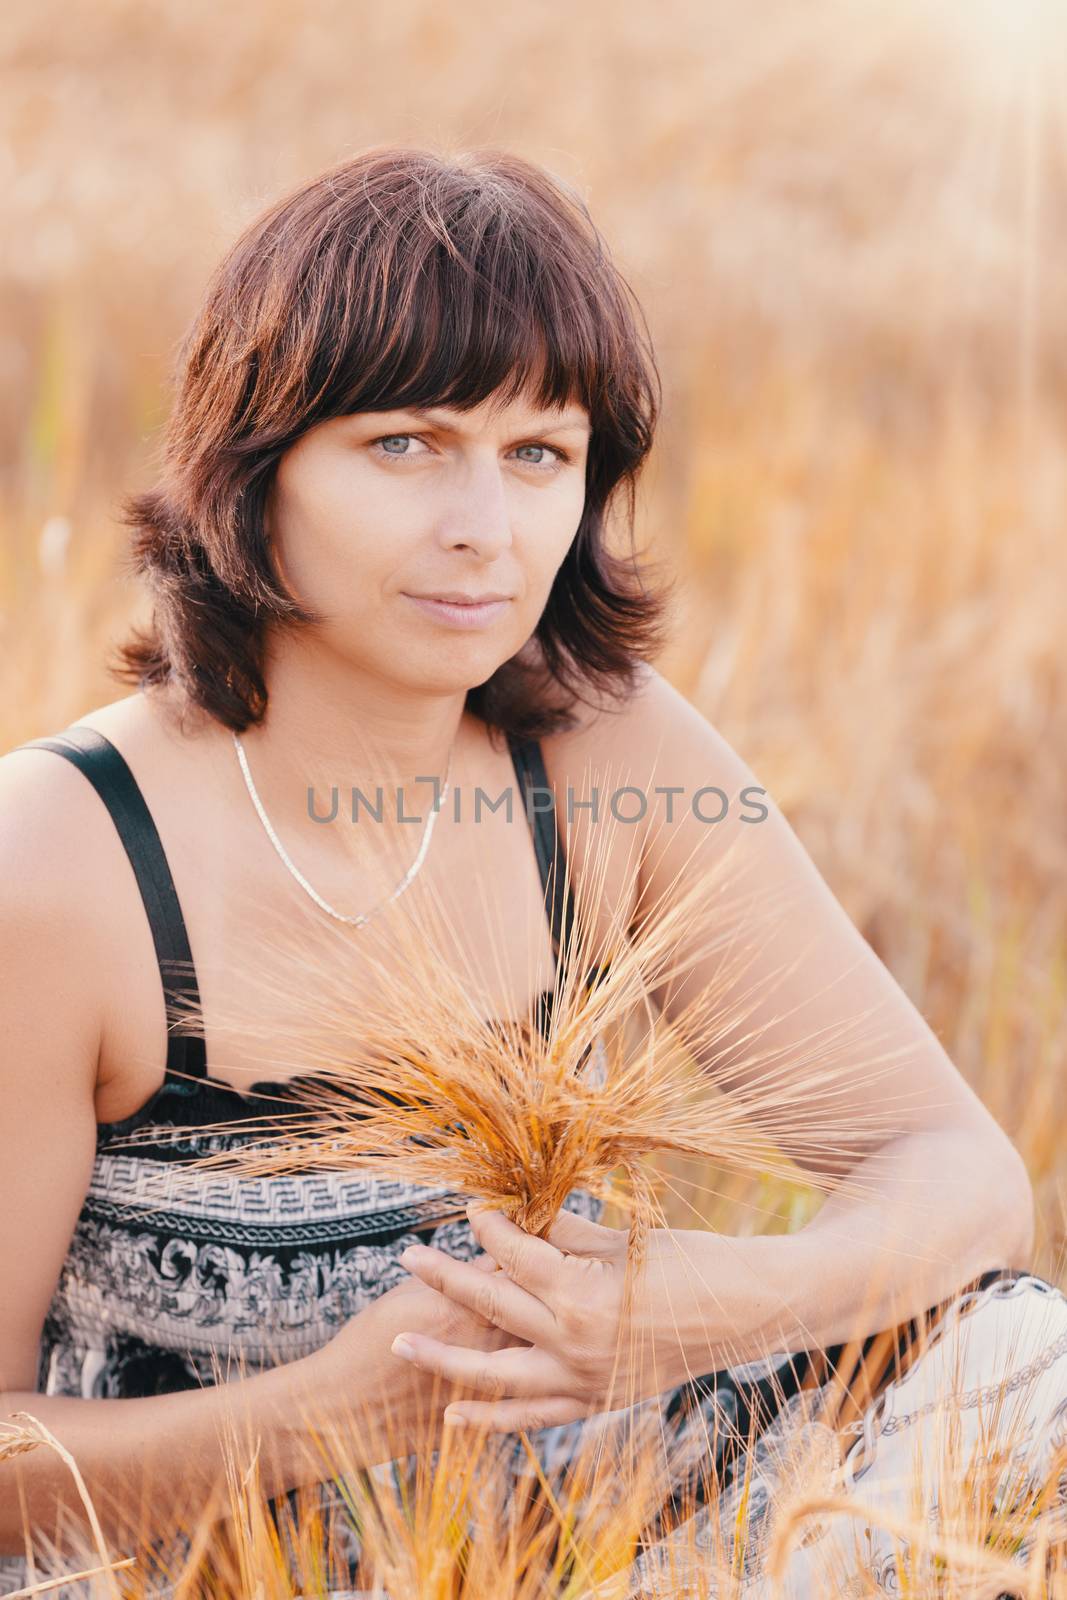 Middle aged beauty woman in a summer dress with no makeup relaxing in countryside tearing into bouquet of golden barley with her hand, summer concept